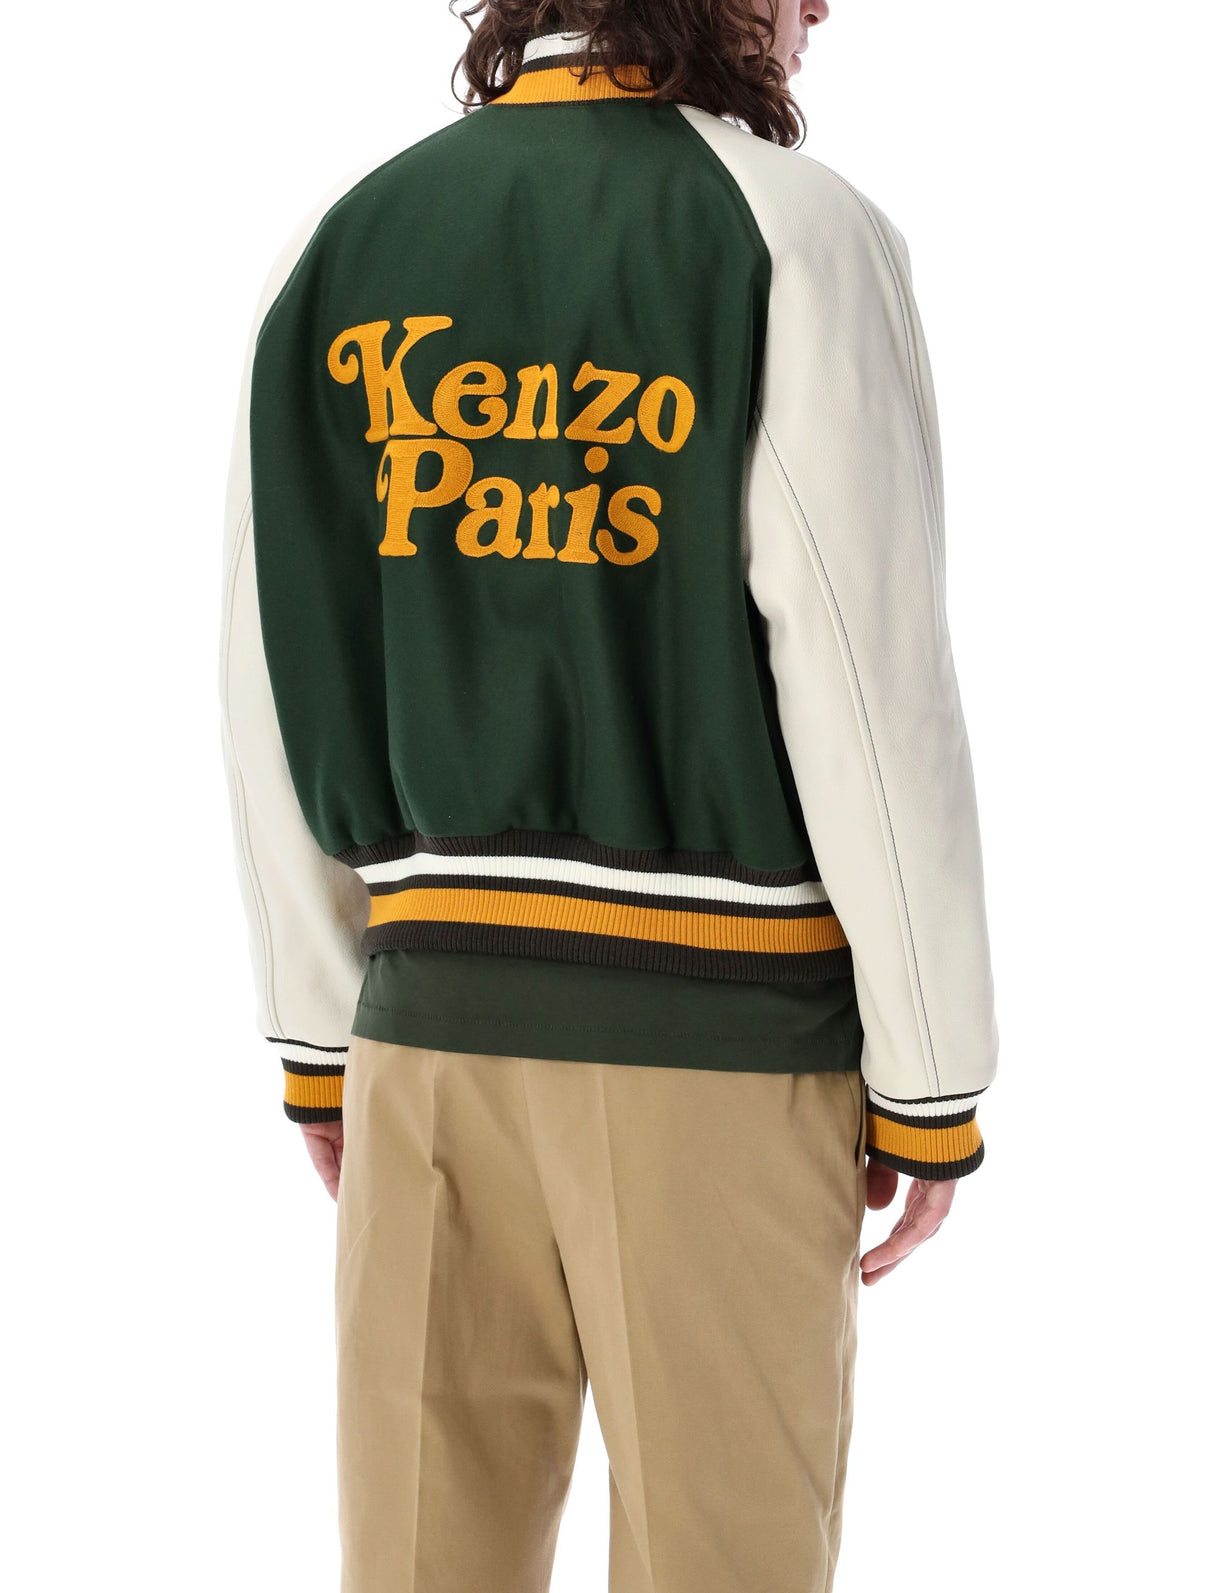 Green and White Varsity Jacket by Verdy and Kenzo